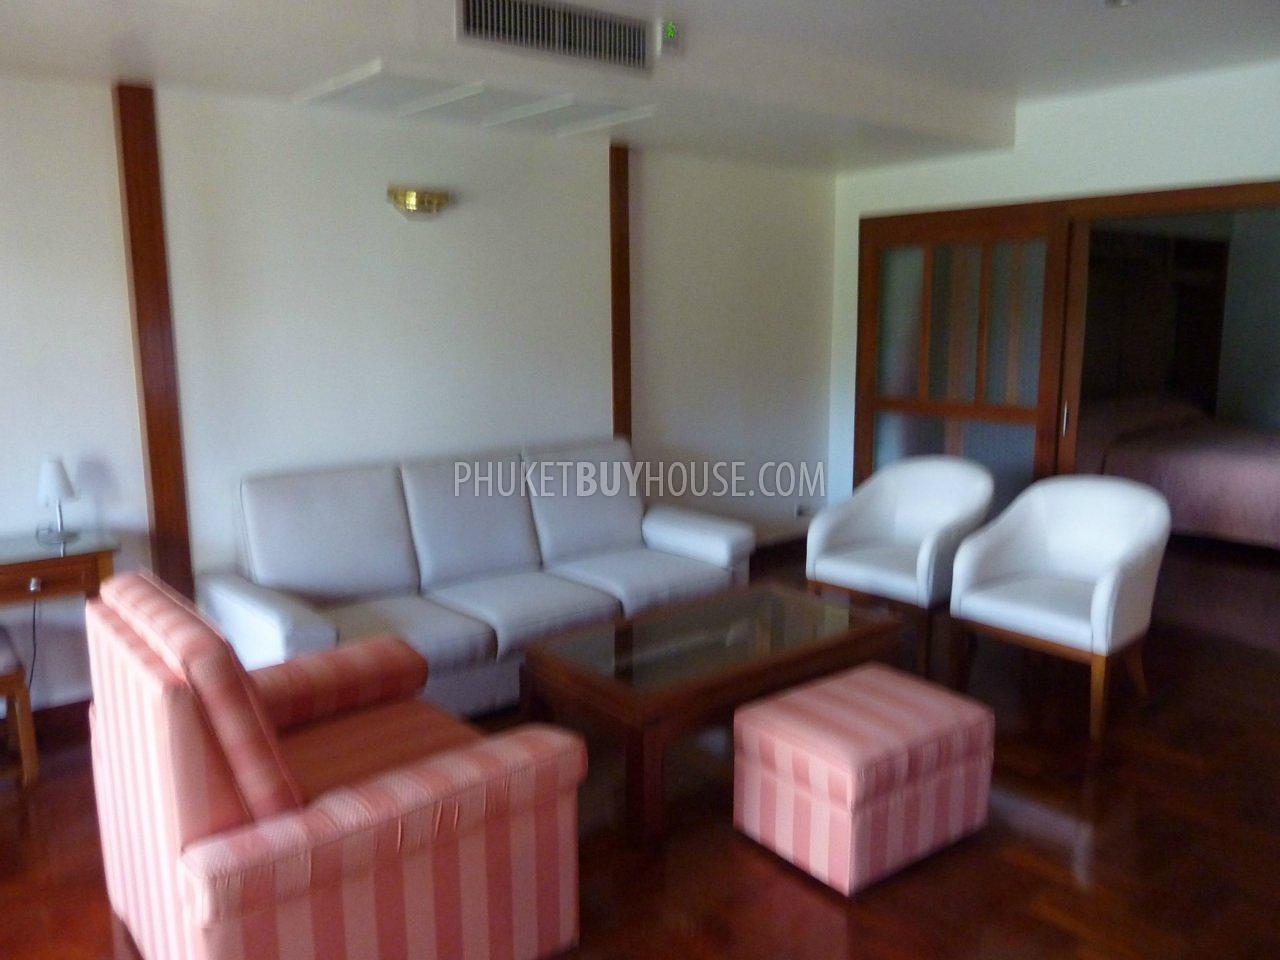 NAI2456: Freehold: Very nice 2 bedr. apartment (top floor), fully furnished, near beautiful Nai Harn Beach. Photo #12